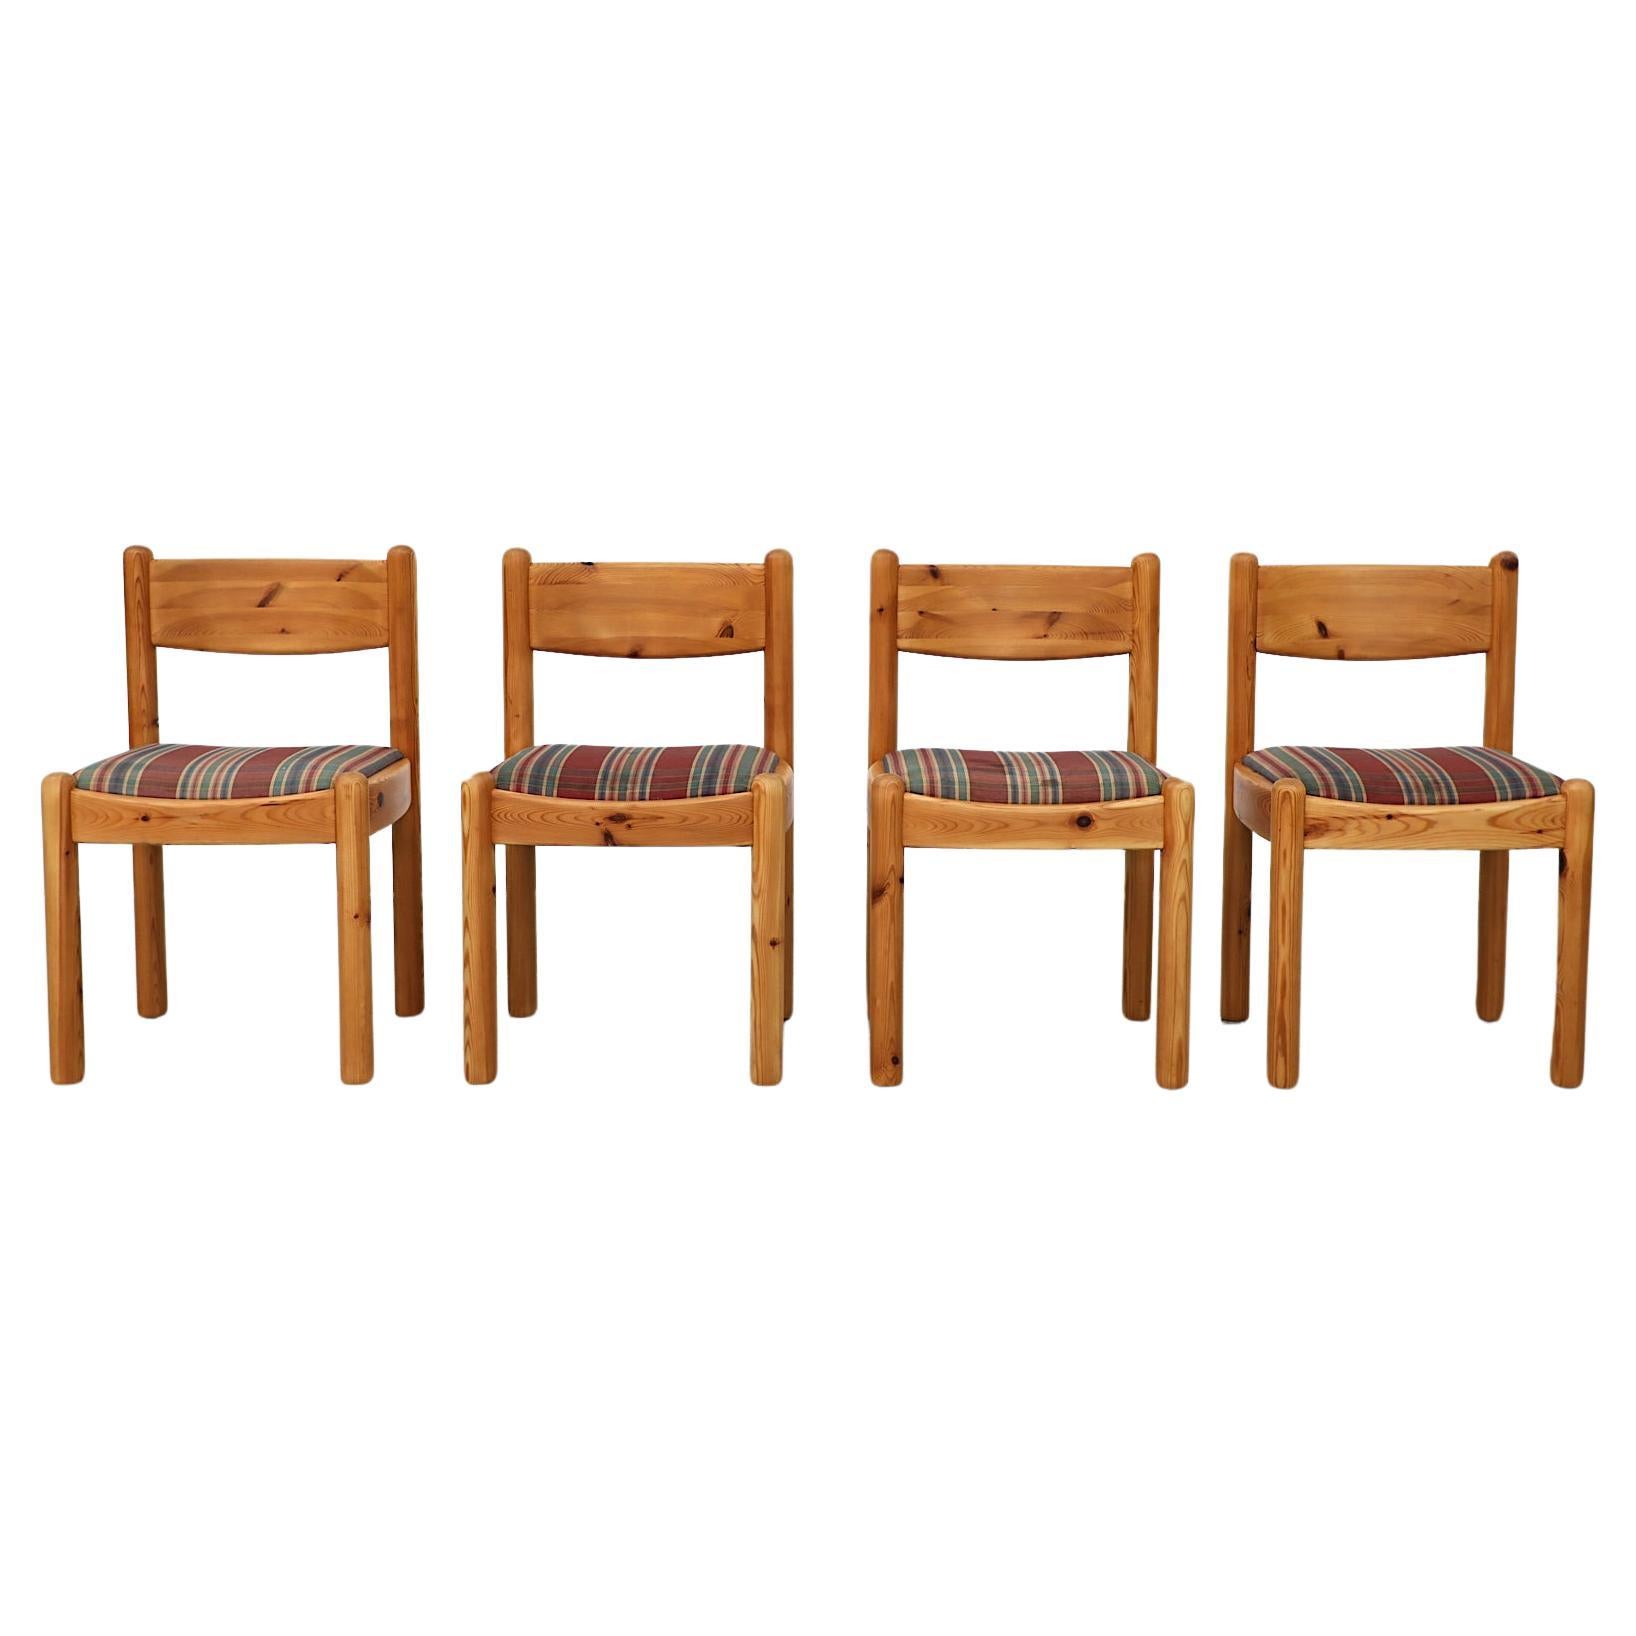 Set of 4 Ate van Apeldoorn Style Pine Dining Chairs w/ Round Legs & Plaid Seats For Sale